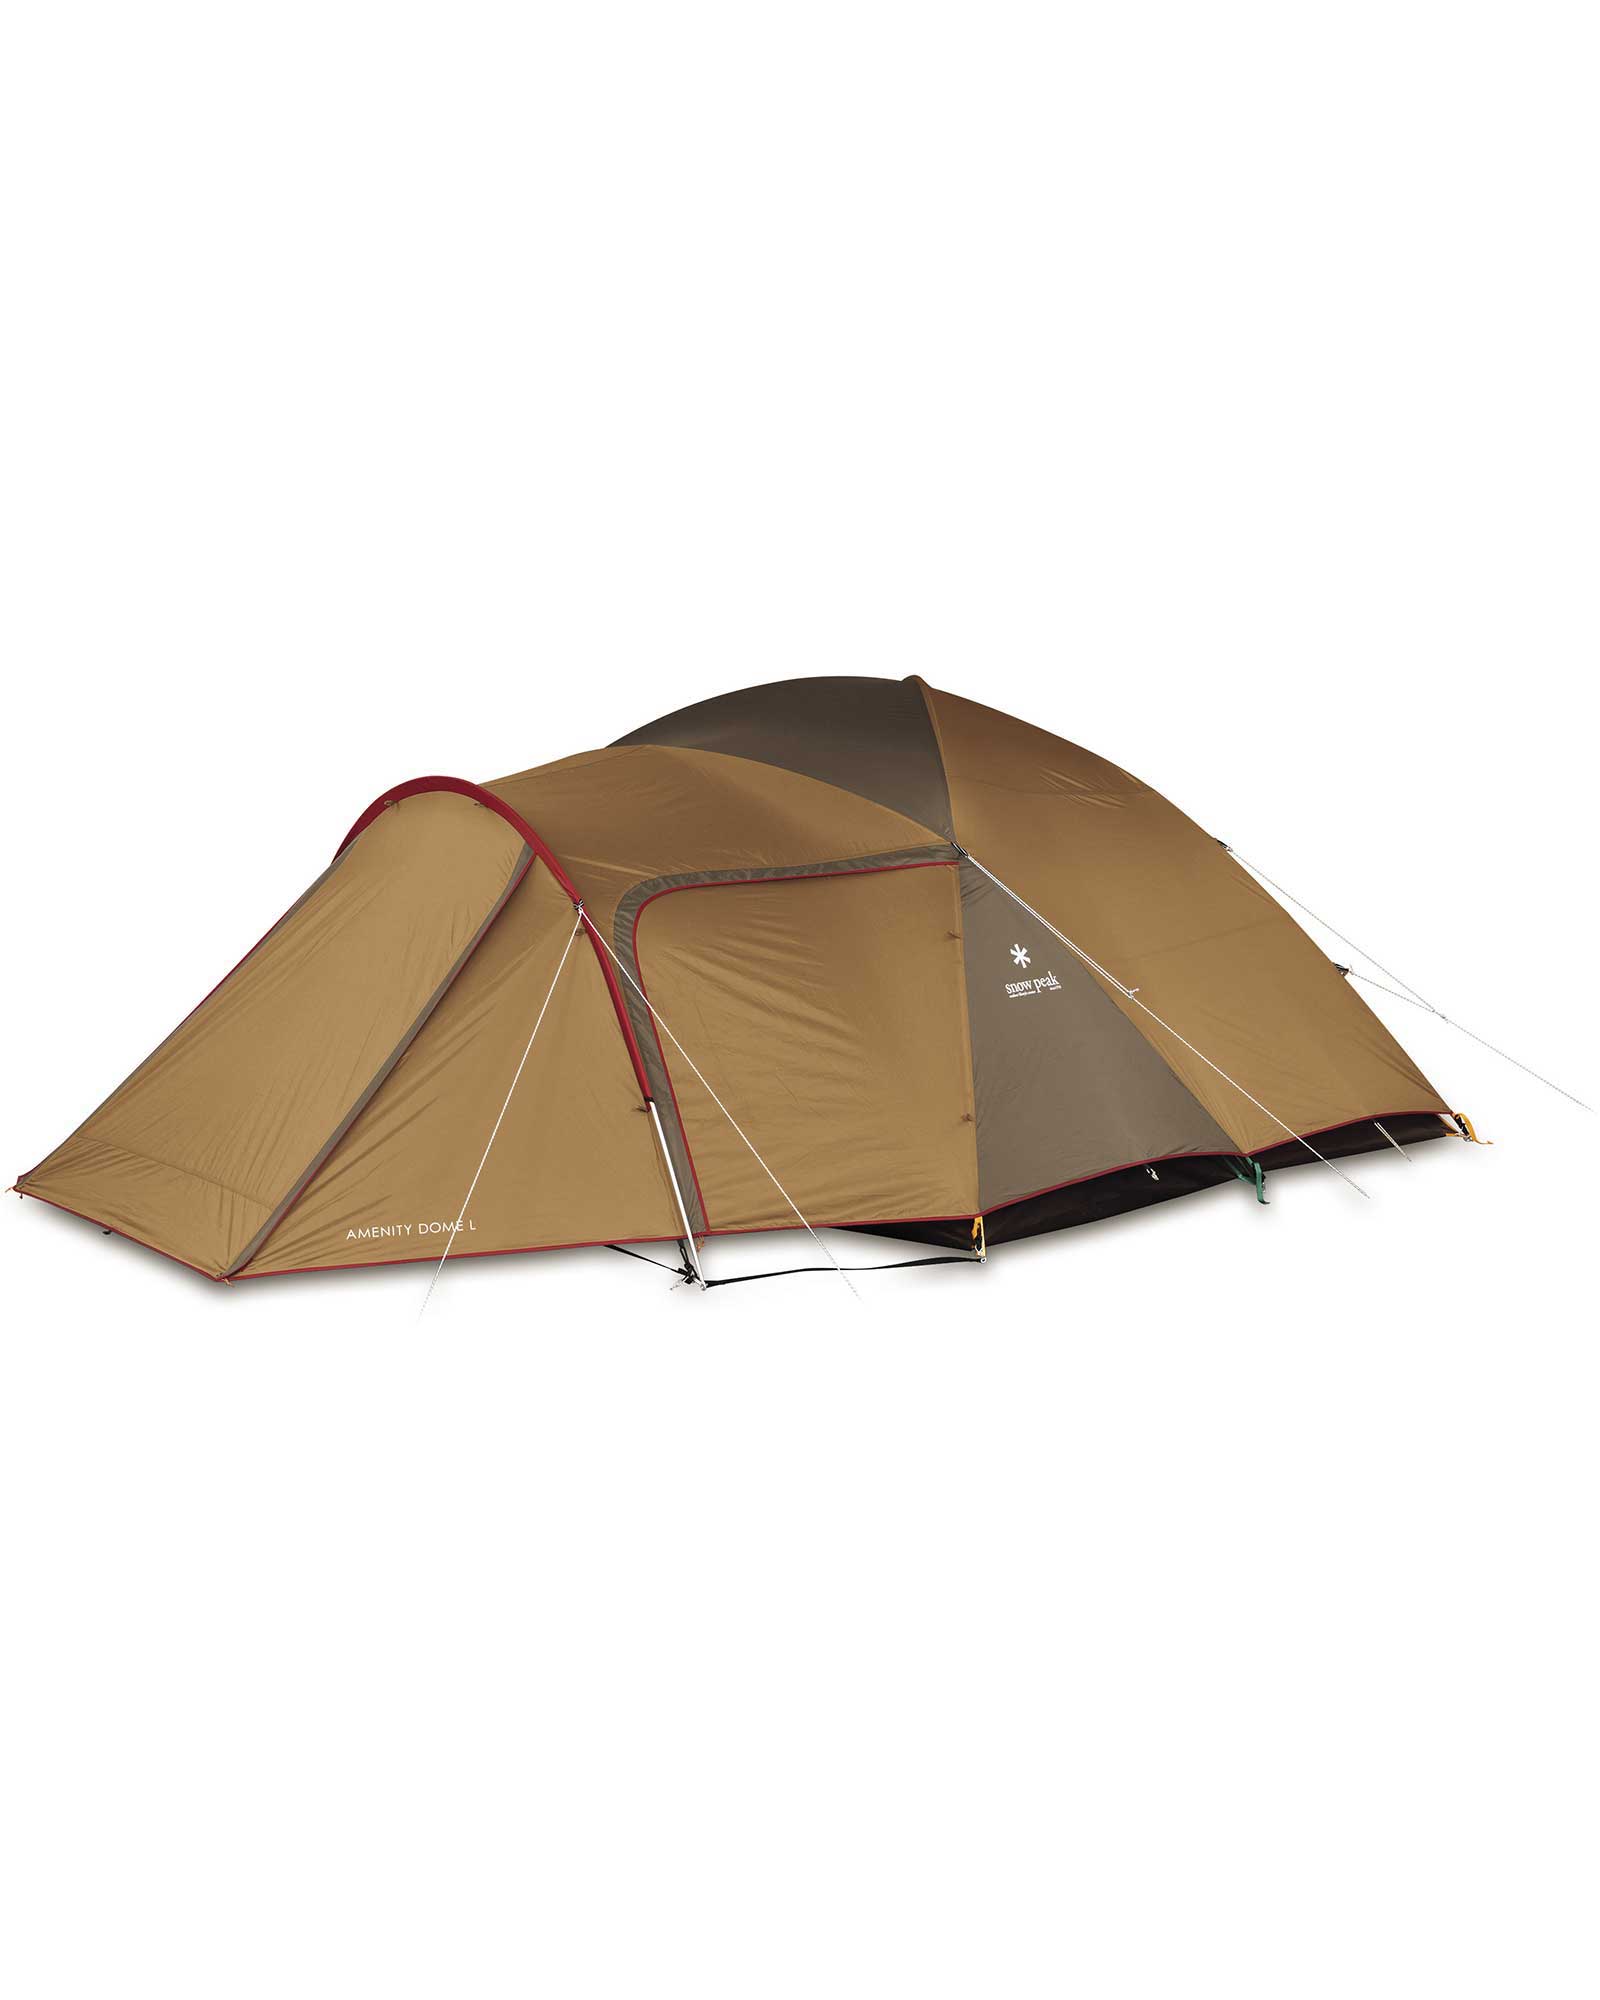 Product image of Snow Peak Amenity Dome L Tent